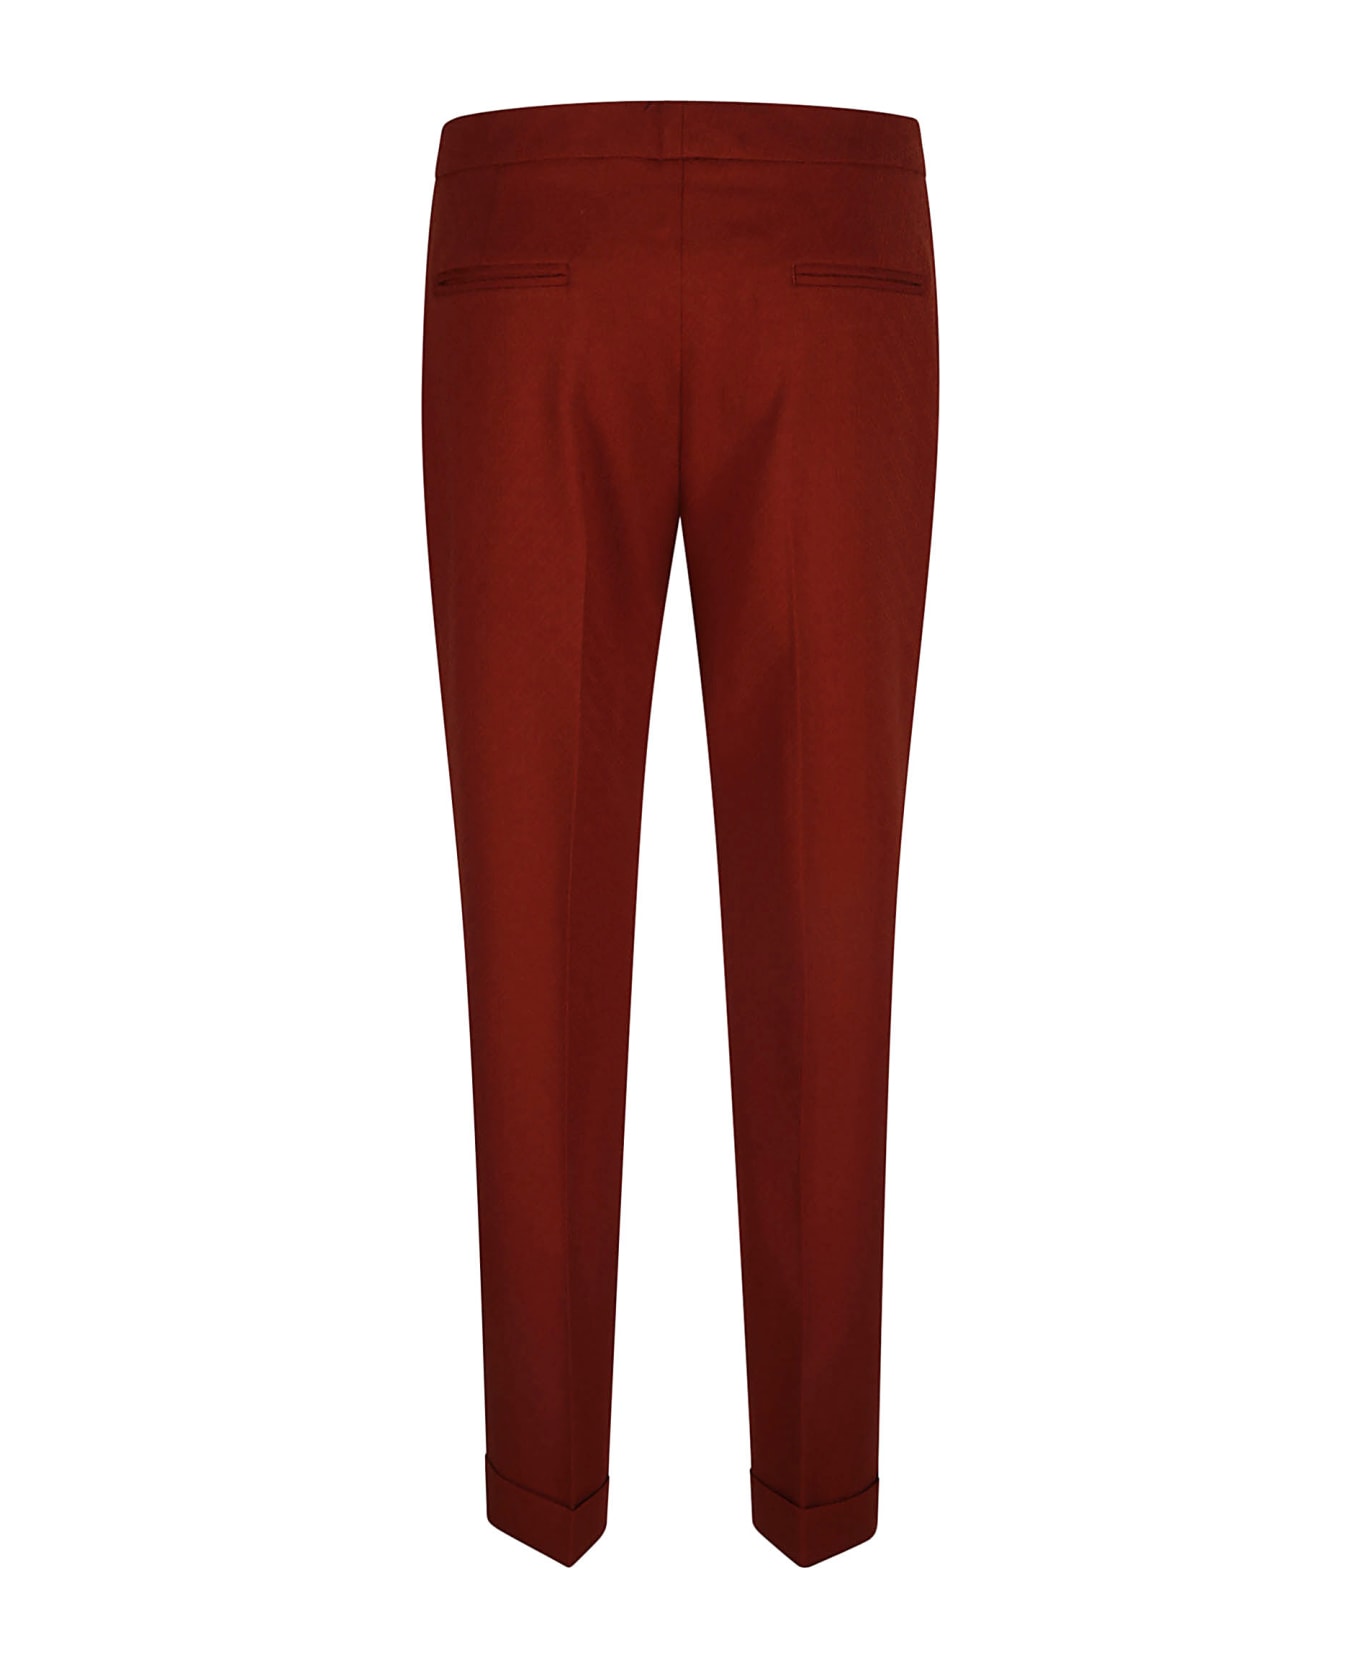 Etro Concealed Trousers - Brown